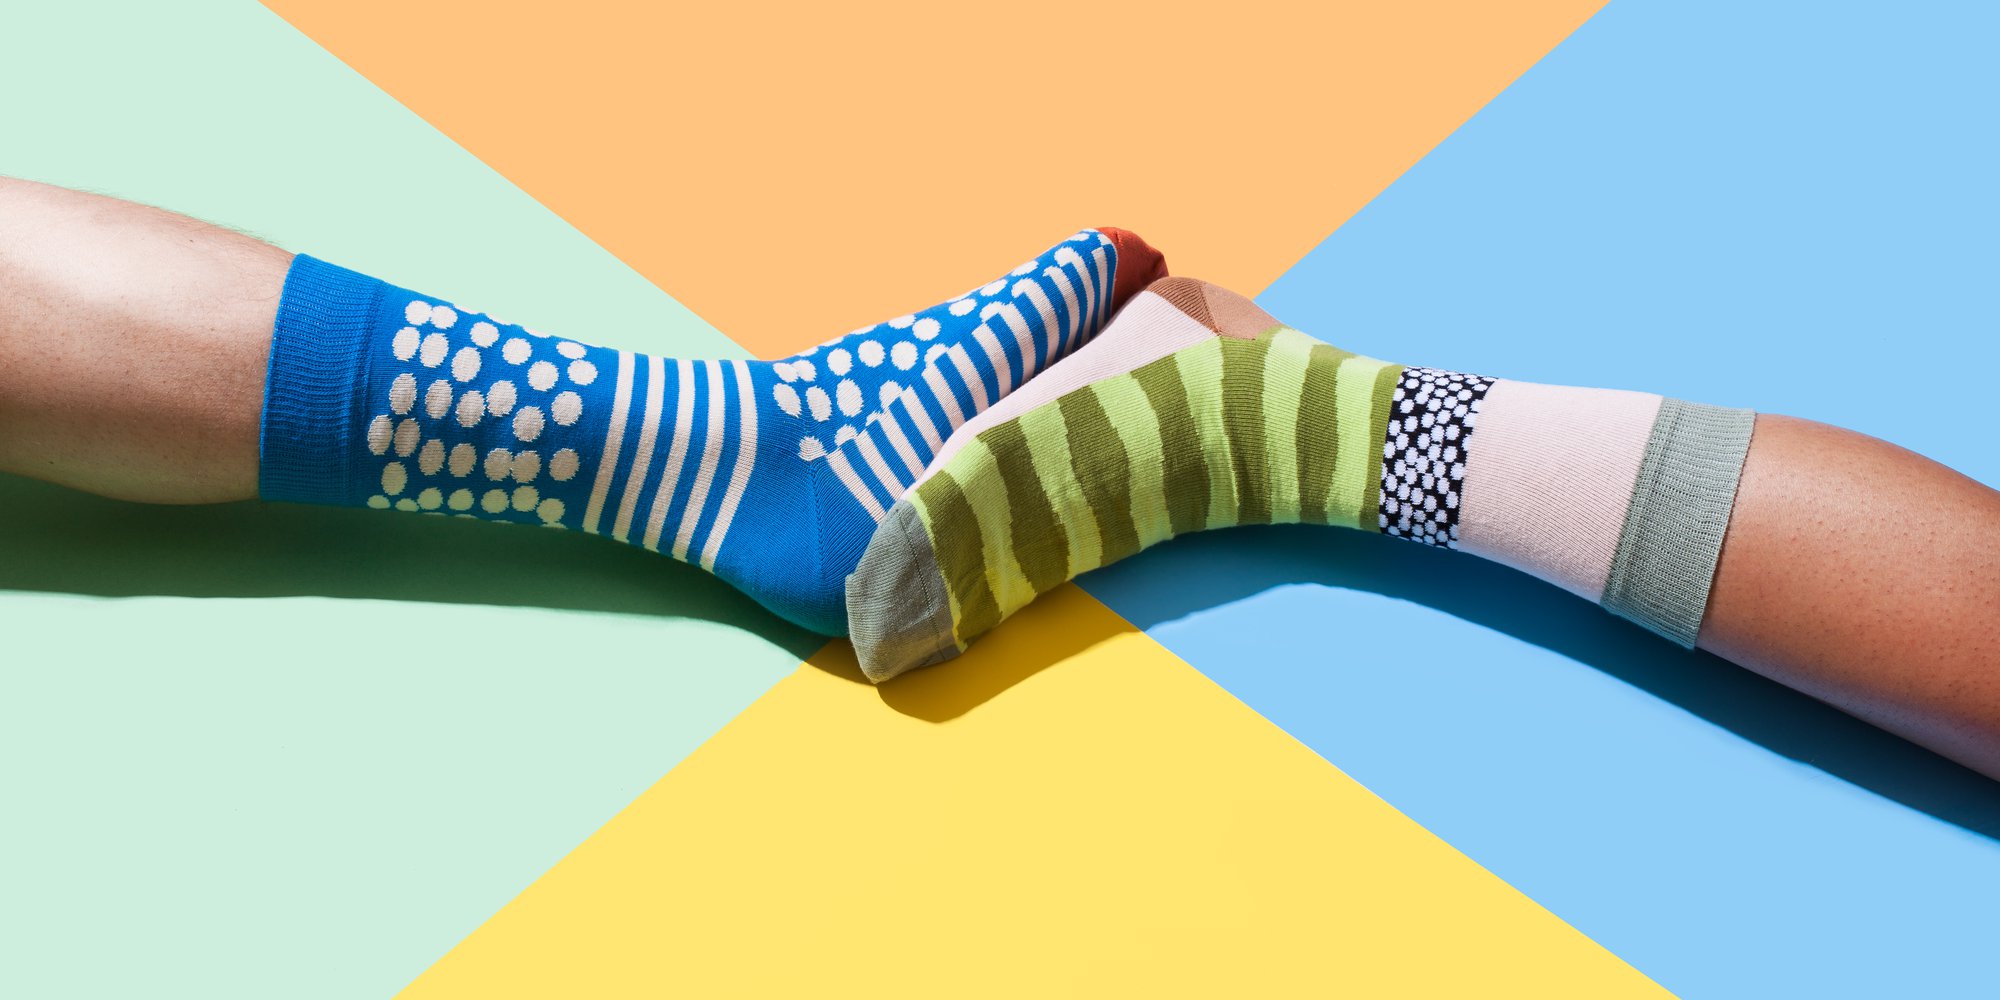 Artfinder x Odd Pears - FREE socks with your art this cyber weekend!